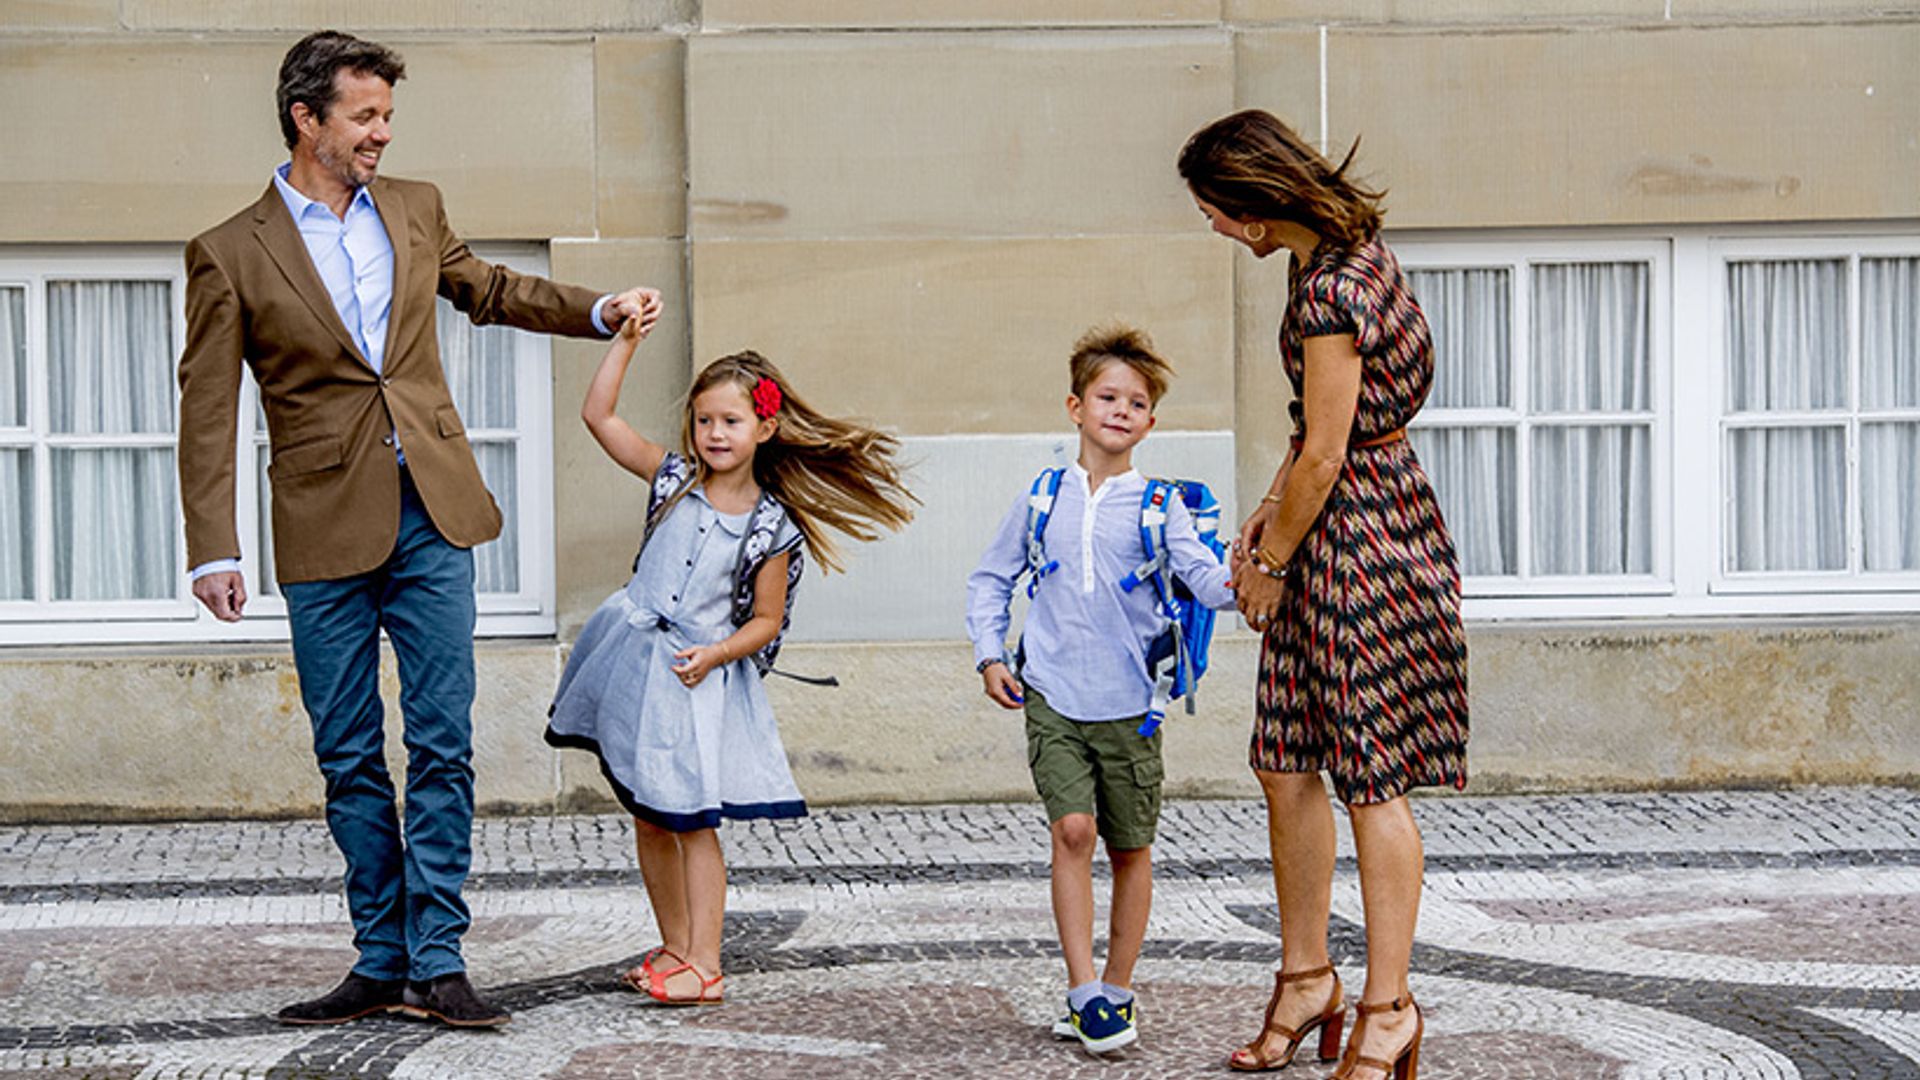 Princess Mary of Denmark's twins steal the show on first day of school